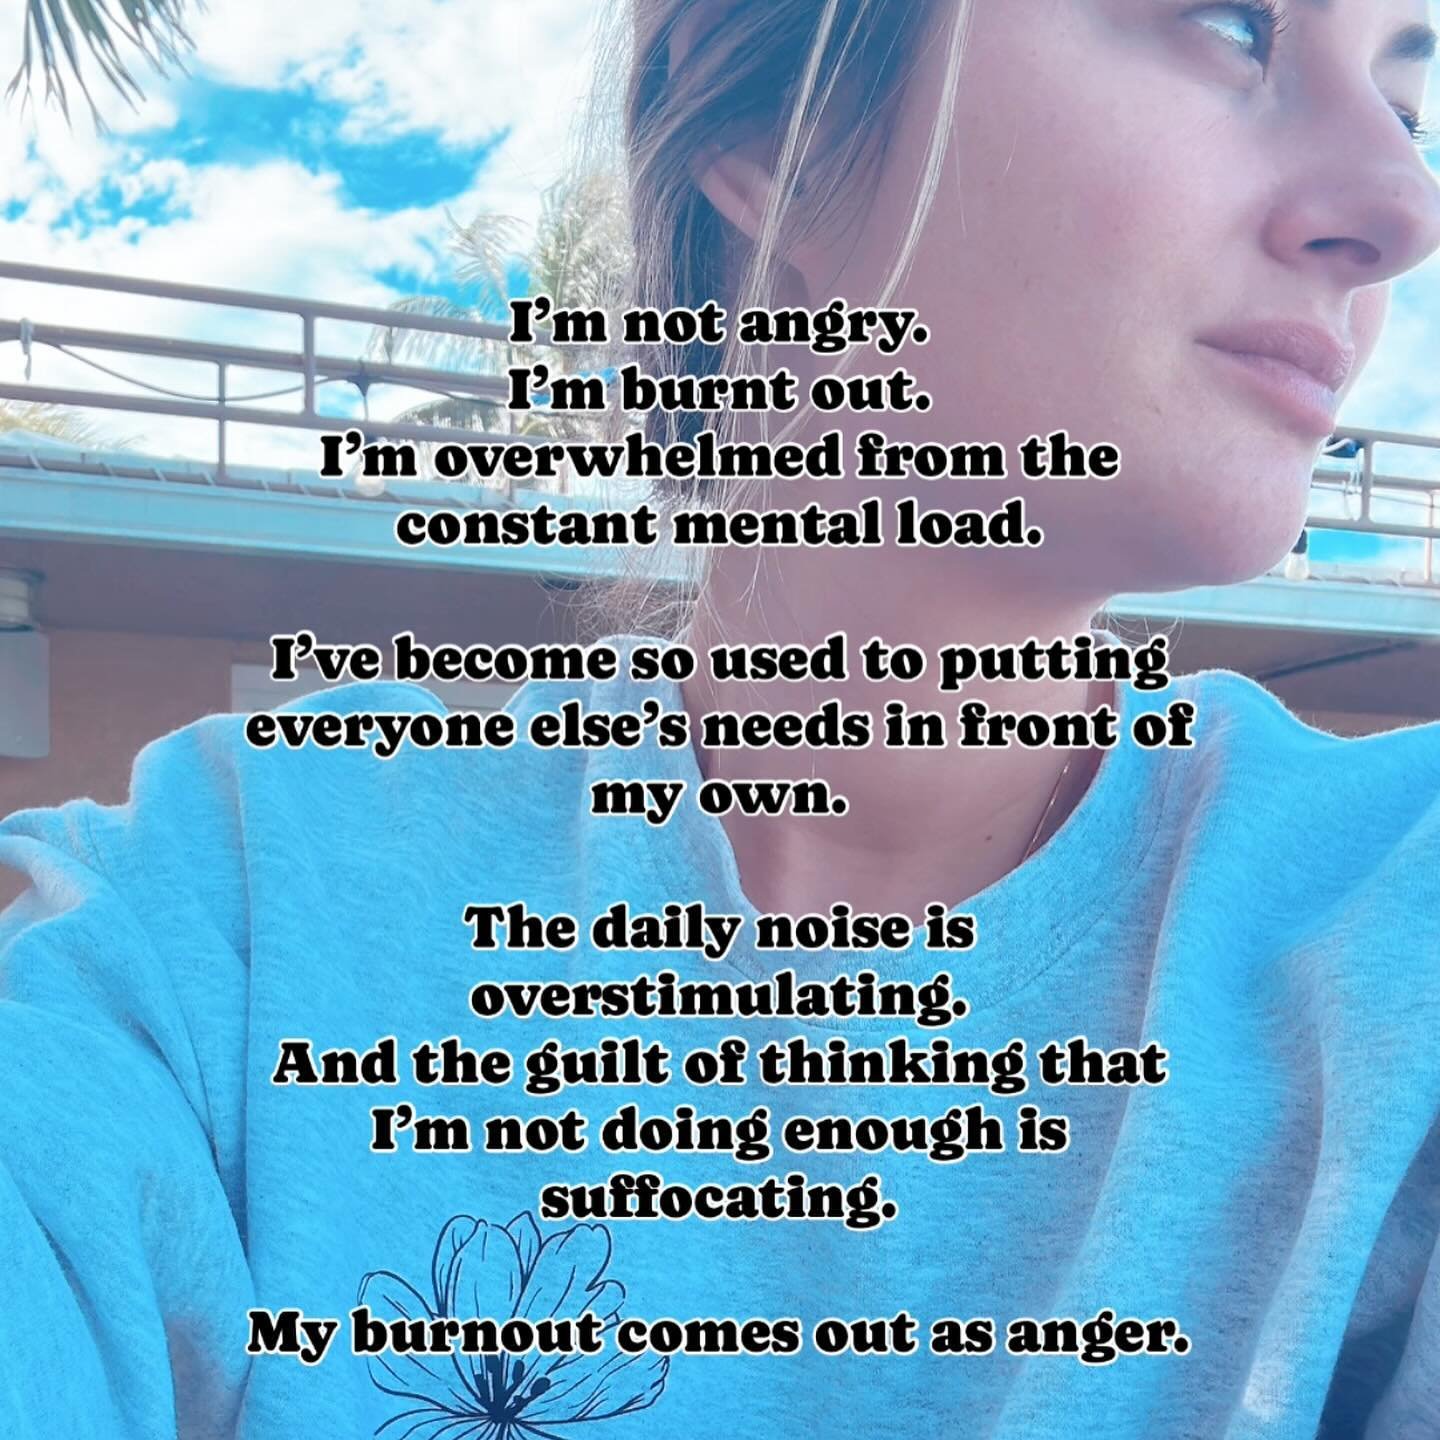 Burnout can manifest as anger- at least for me it does. And it also exacerbates my anxiety. 

I&rsquo;m recognizing it and working on it.
It&rsquo;s definitely a work in progress.
I never knew how tough regulating my emotions would be; especially whe